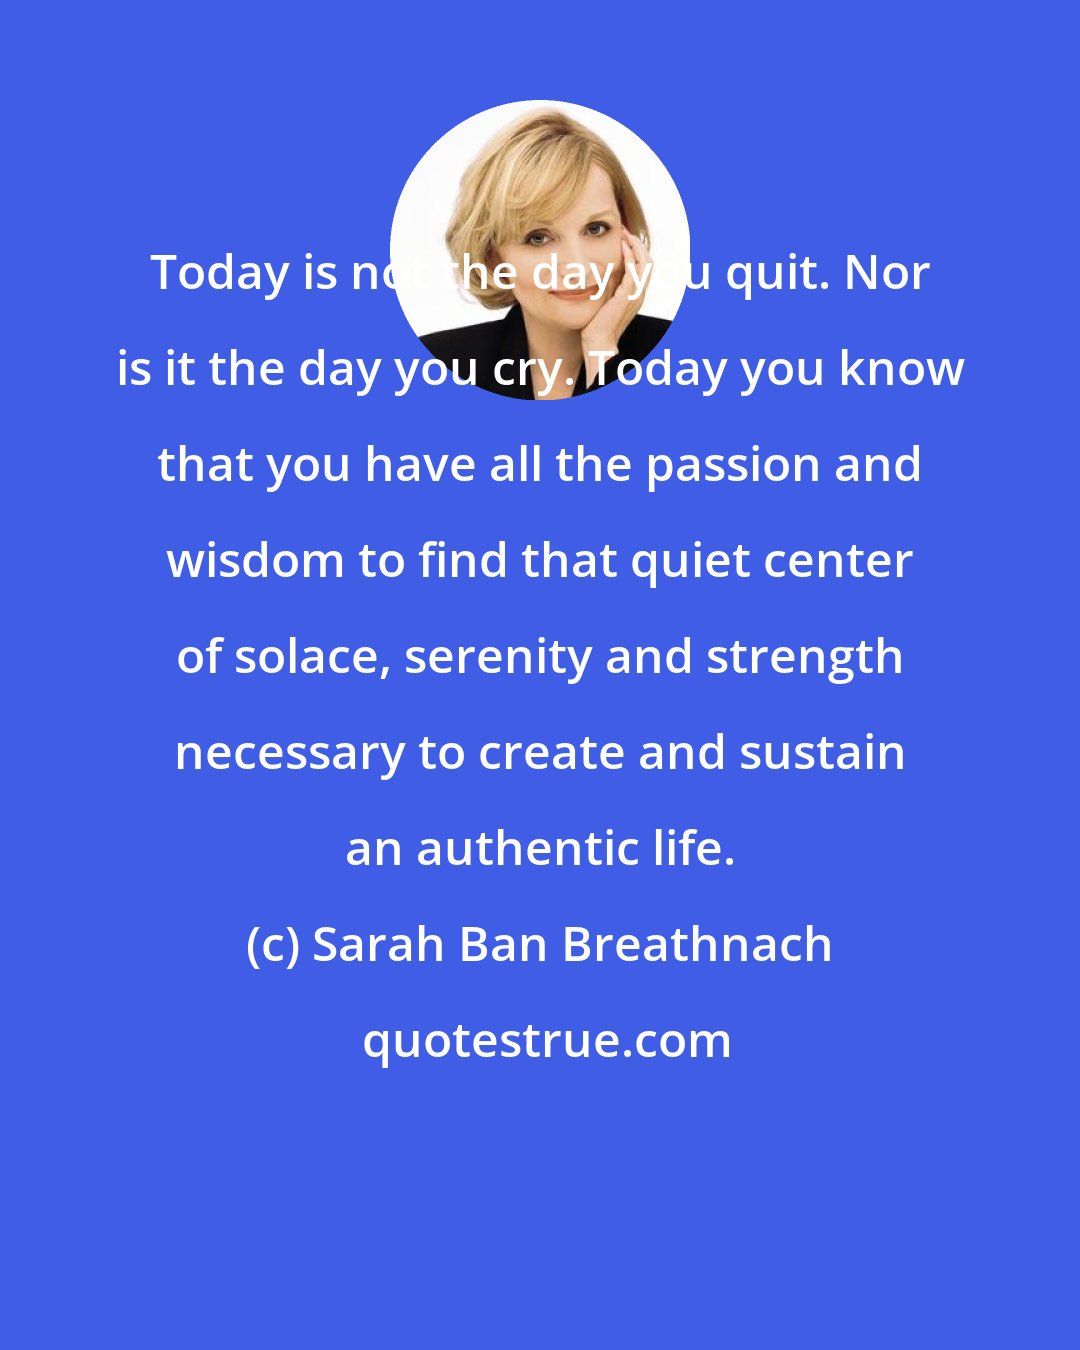 Sarah Ban Breathnach: Today is not the day you quit. Nor is it the day you cry. Today you know that you have all the passion and wisdom to find that quiet center of solace, serenity and strength necessary to create and sustain an authentic life.